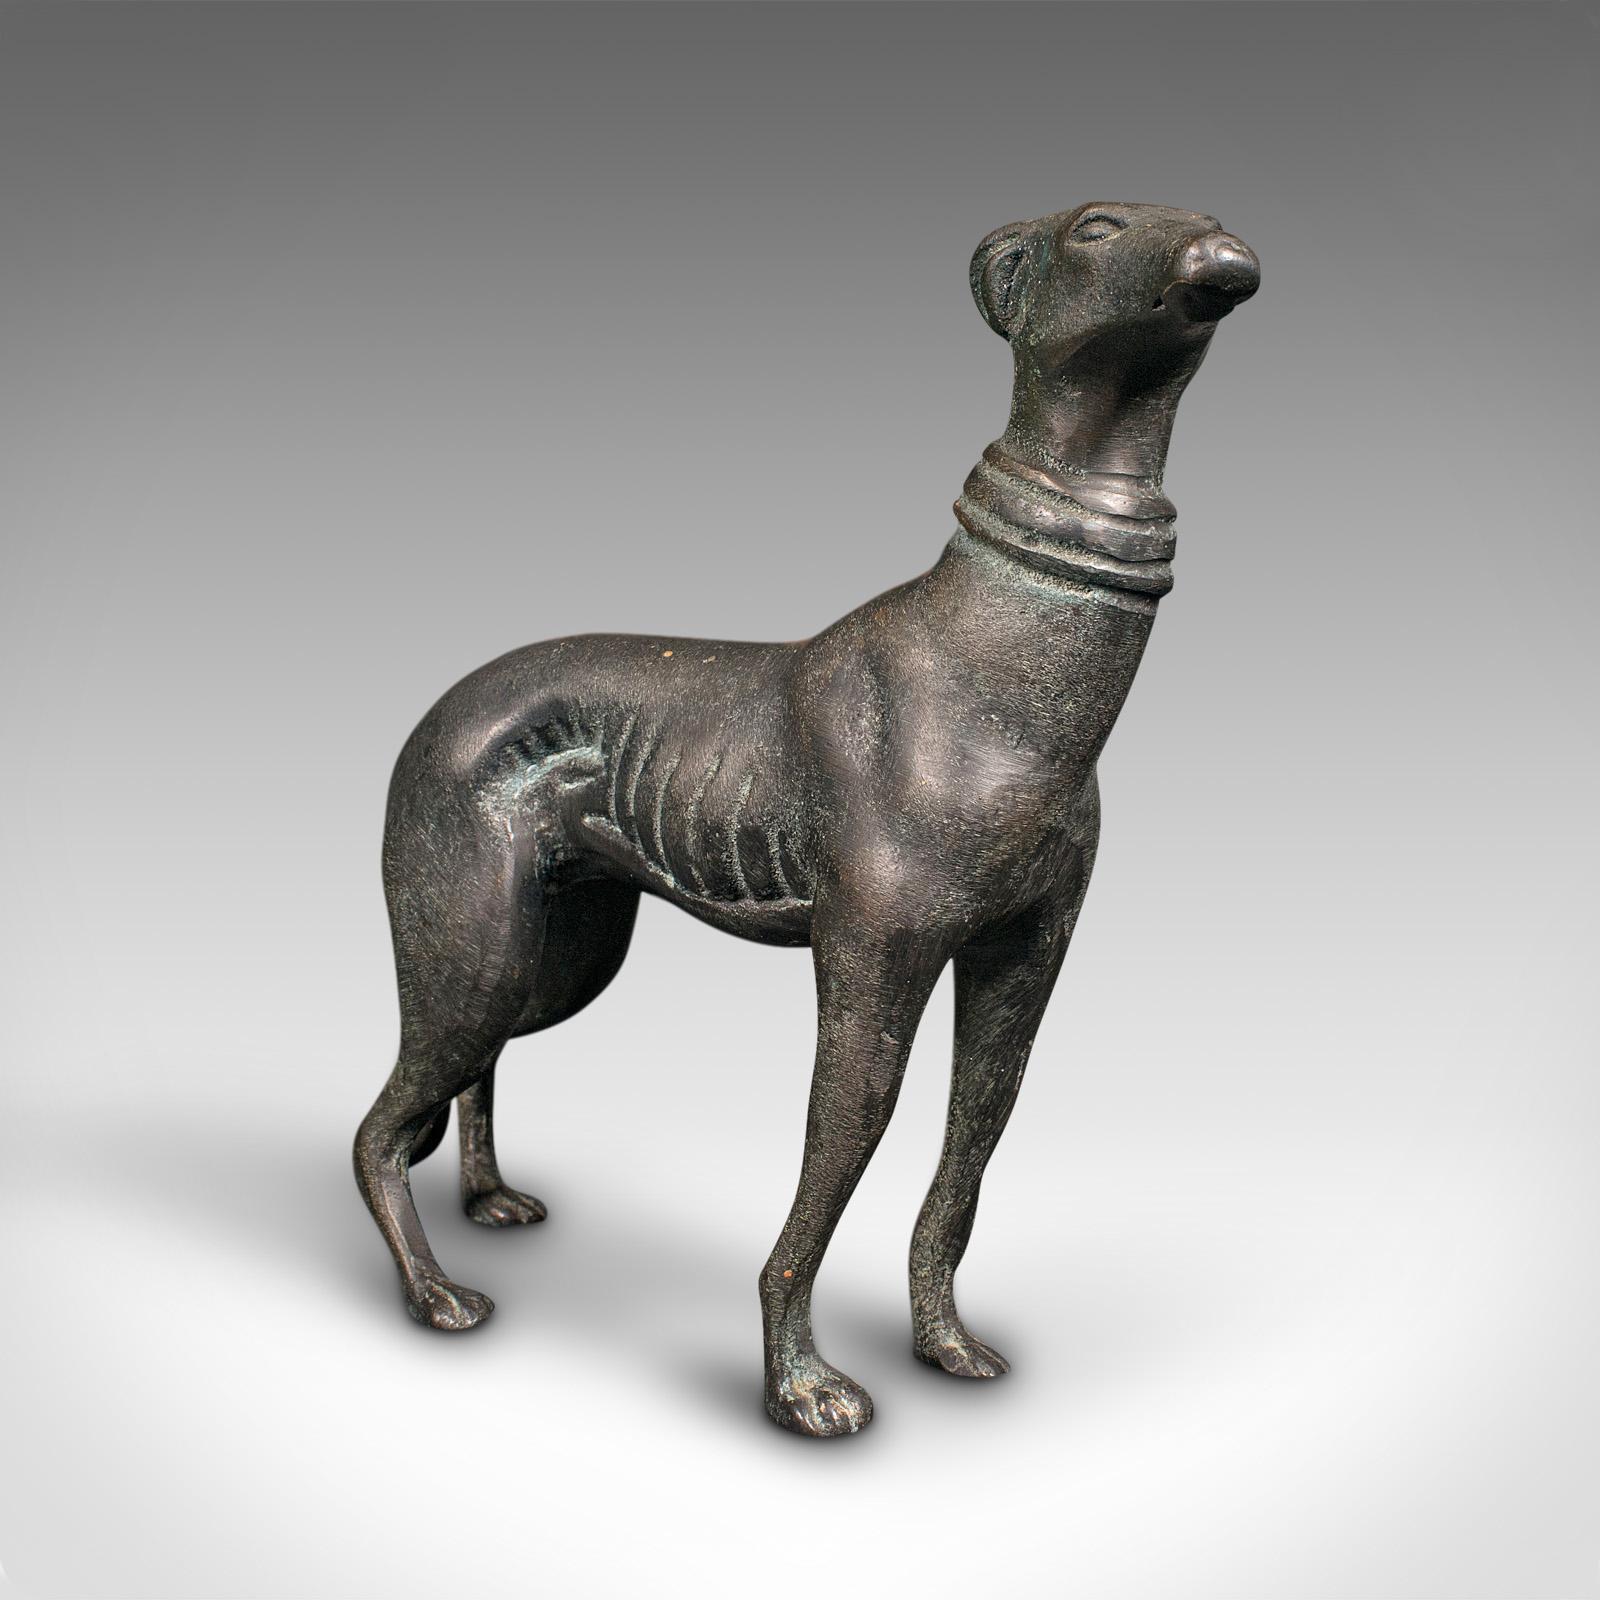 This is a vintage greyhound figure. A French, bronze dog statue, dating to the Art Deco period, circa 1930.

Graceful and endearing, a treat for the display case or mantle
Displaying a desirable aged patina in good original order
Crafted in